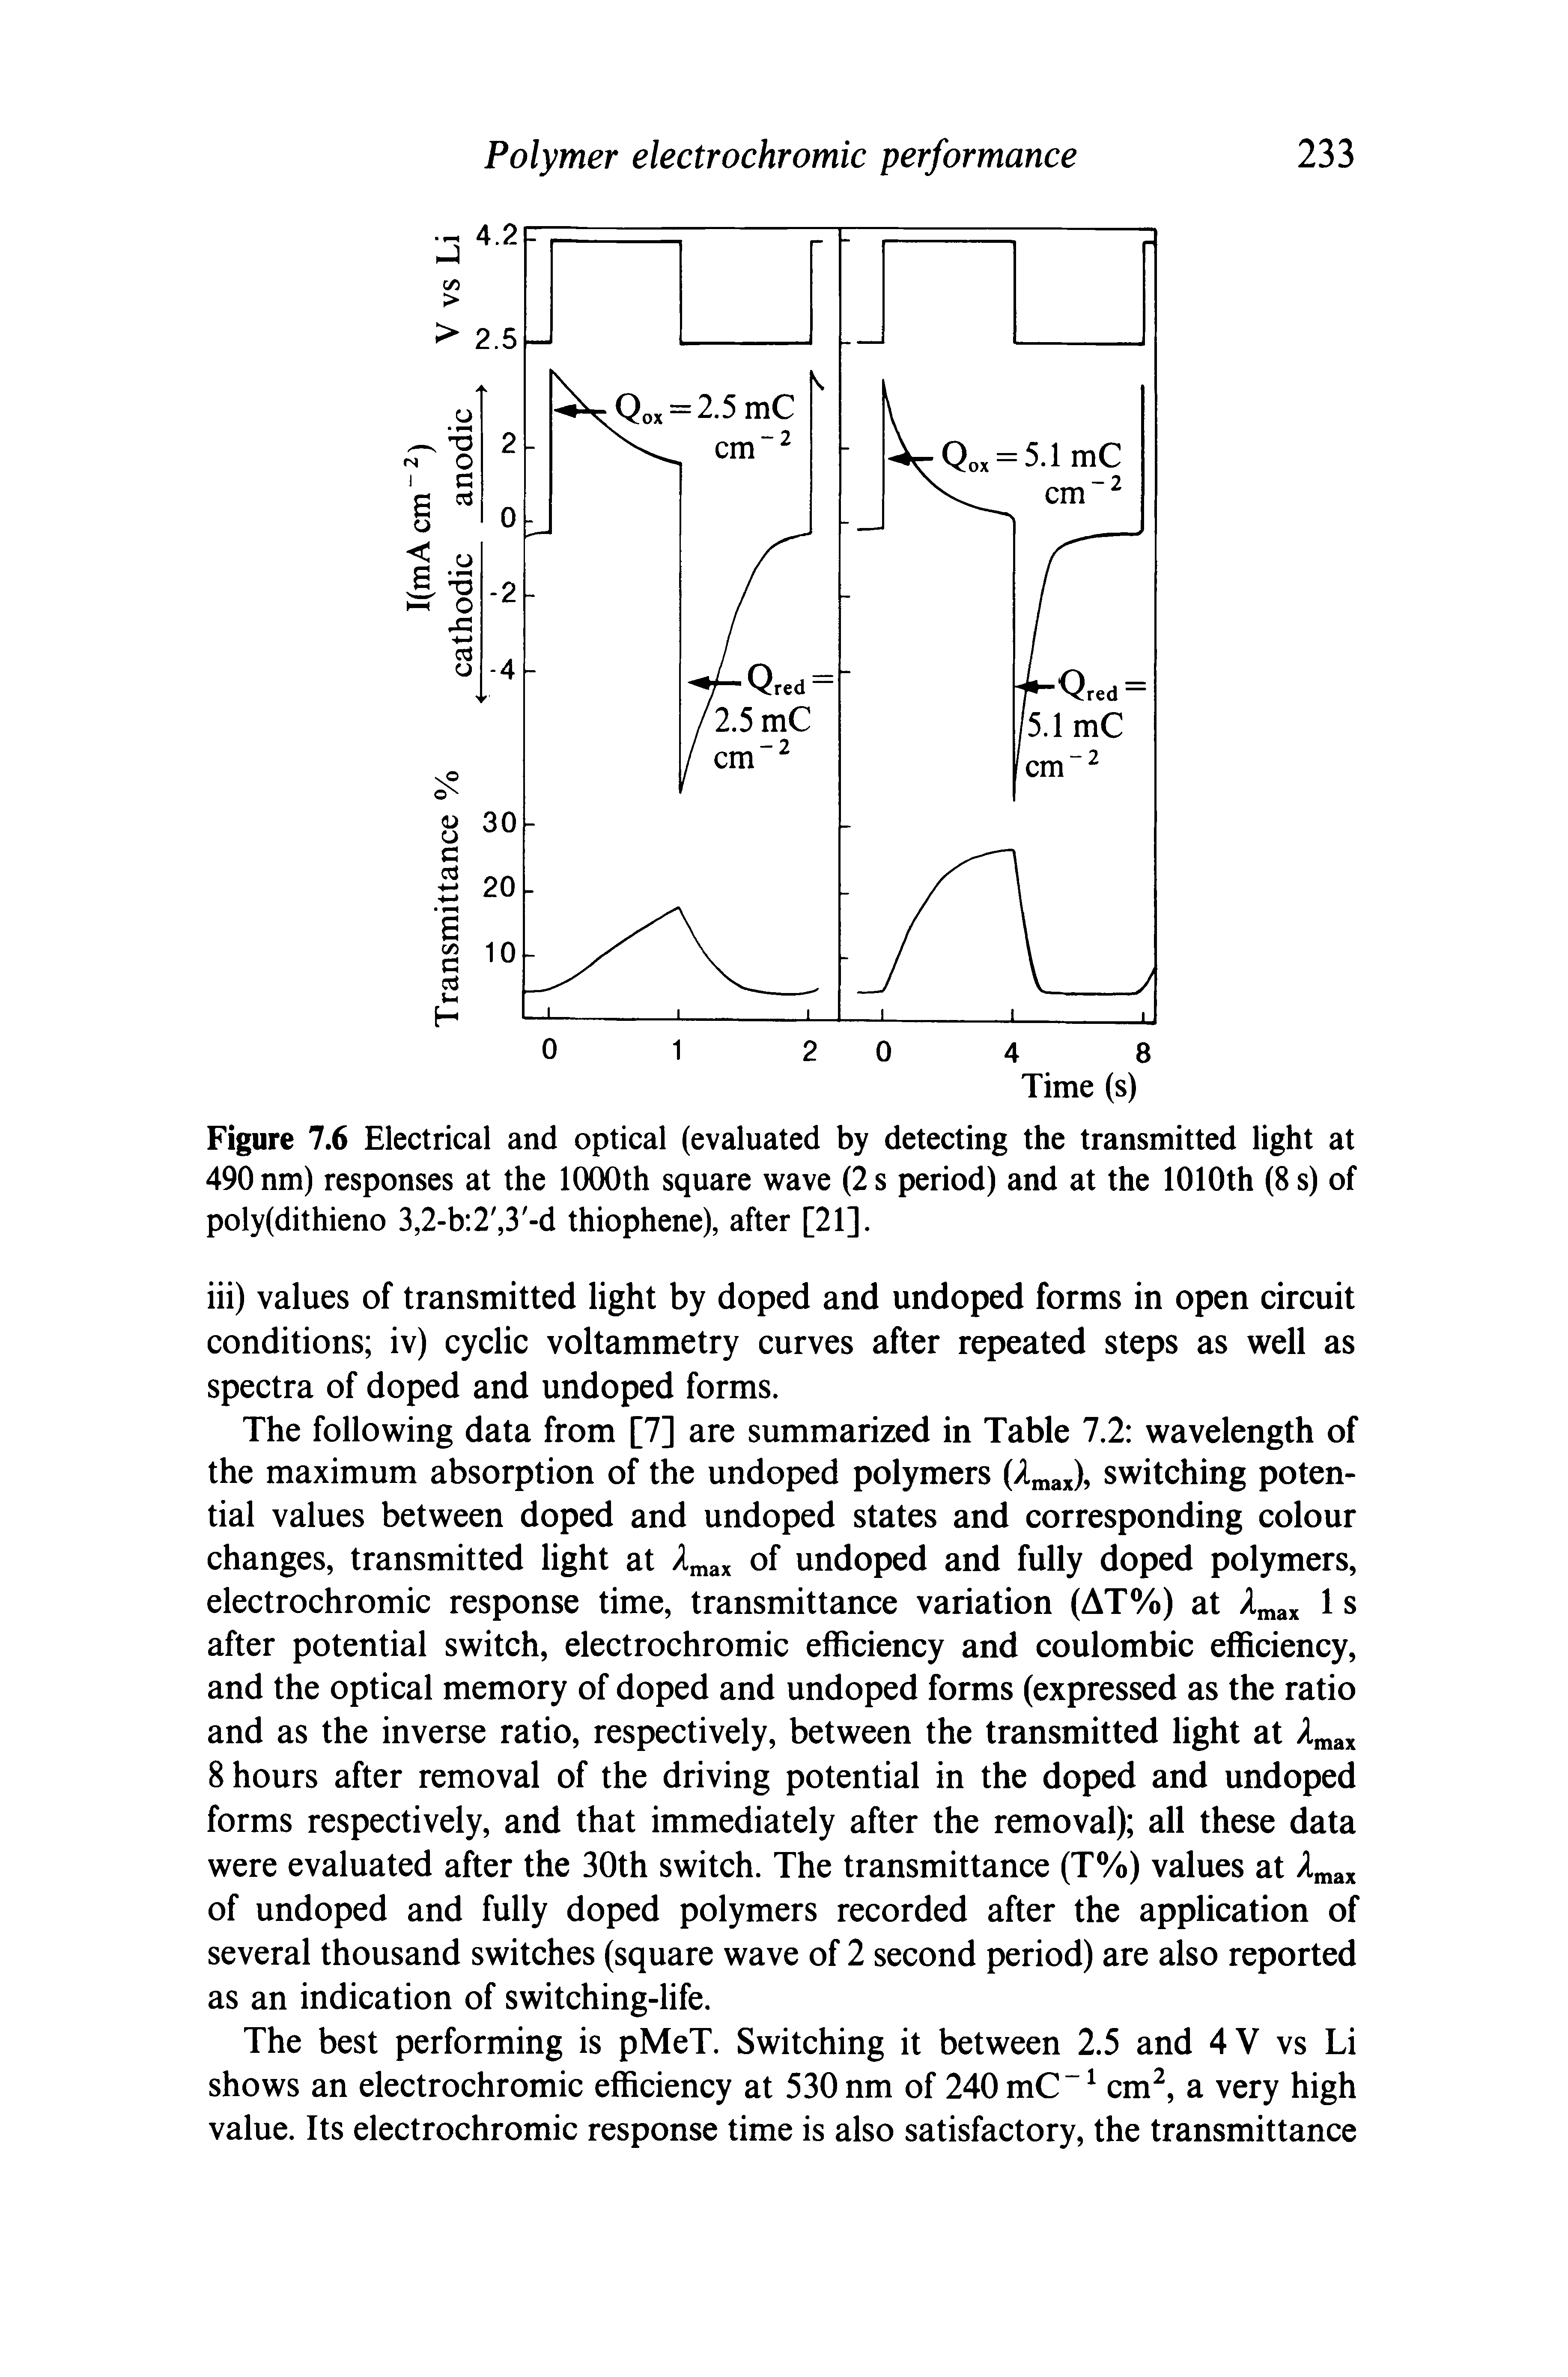 Figure 7.6 Electrical and optical (evaluated by detecting the transmitted light at 490 nm) responses at the 1000th square wave (2 s period) and at the 1010th (8 s) of poly(dithieno 3,2-b 2, 3 -d thiophene), after [21].